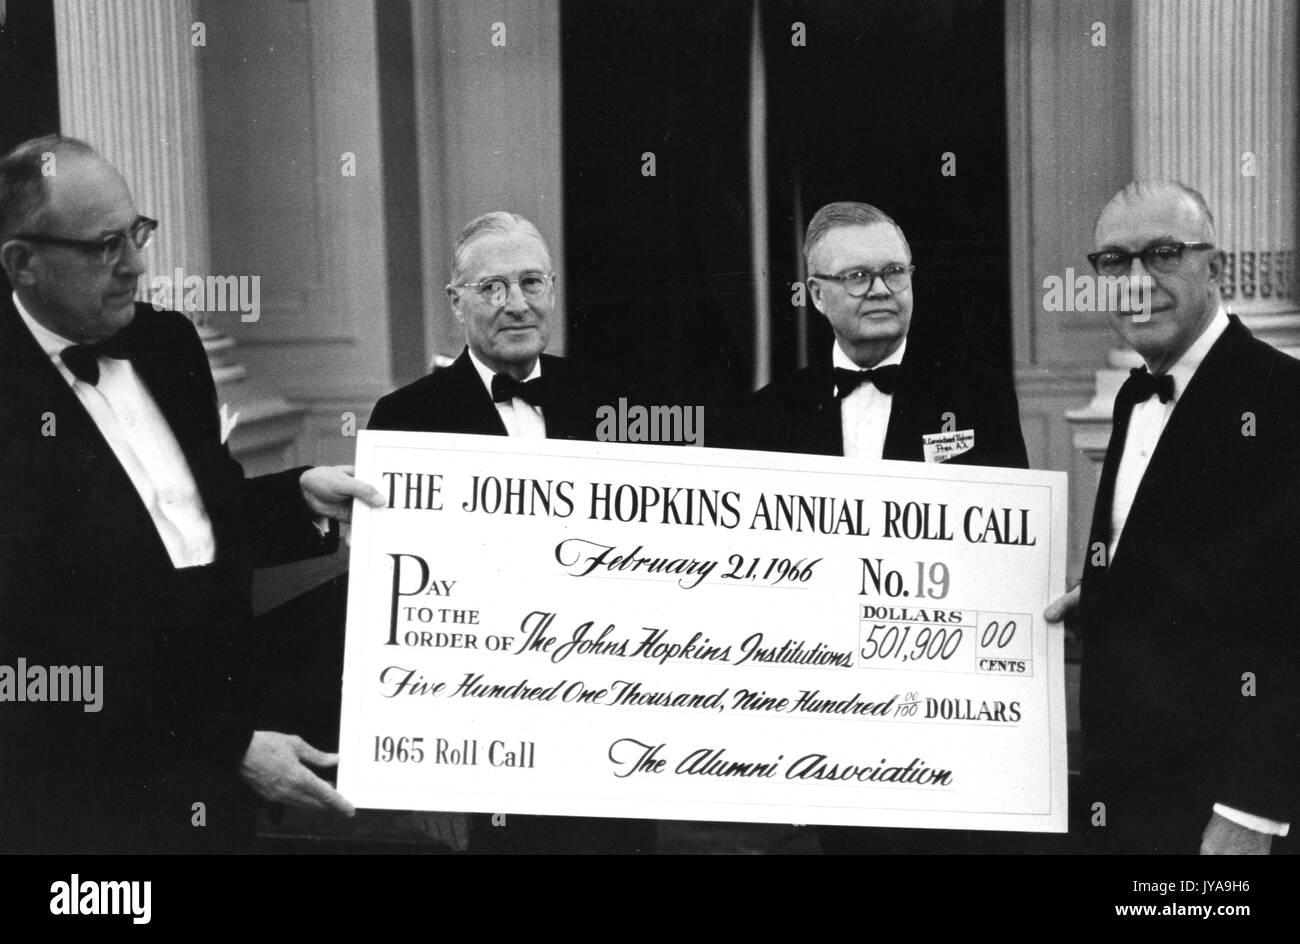 Milton Stover Eisenhower (right), president of Johns Hopkins University, standing with colleagues to present a check amounting to the funds raised by the Alumni Association for that year, February 21, 1966. Stock Photo